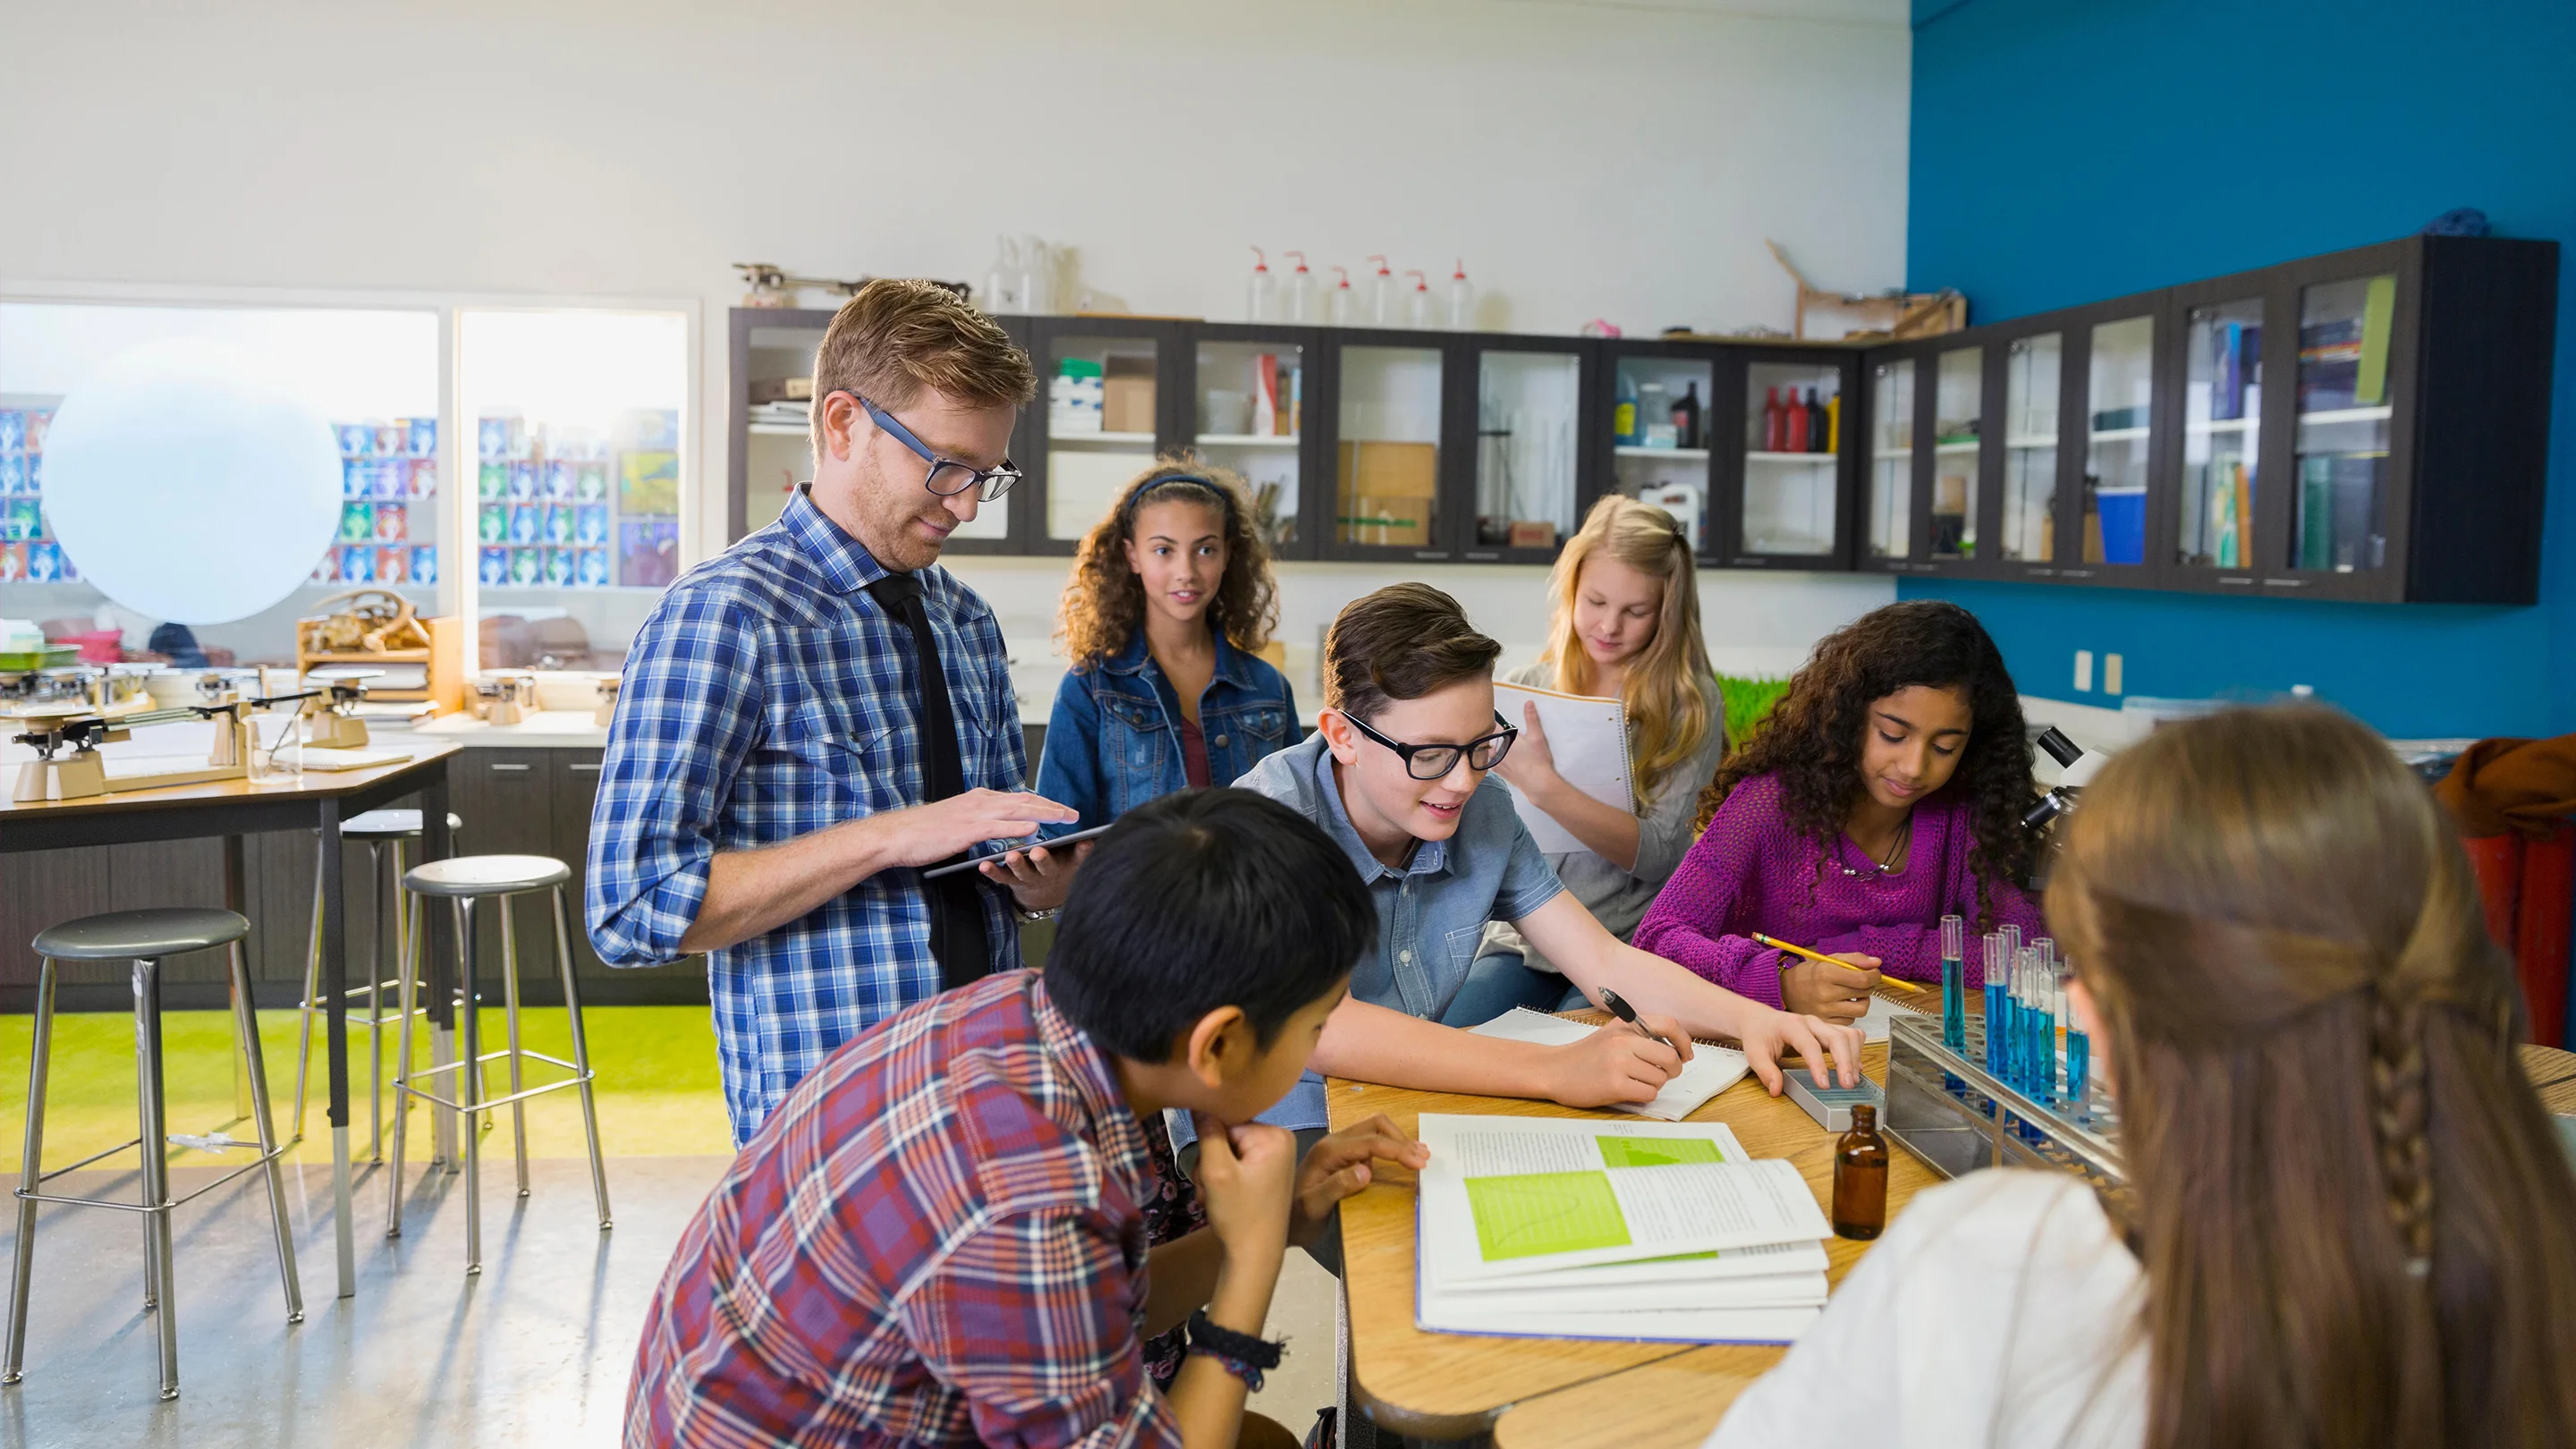 5 Steps to Keep Engagement High During Project-Based Learning